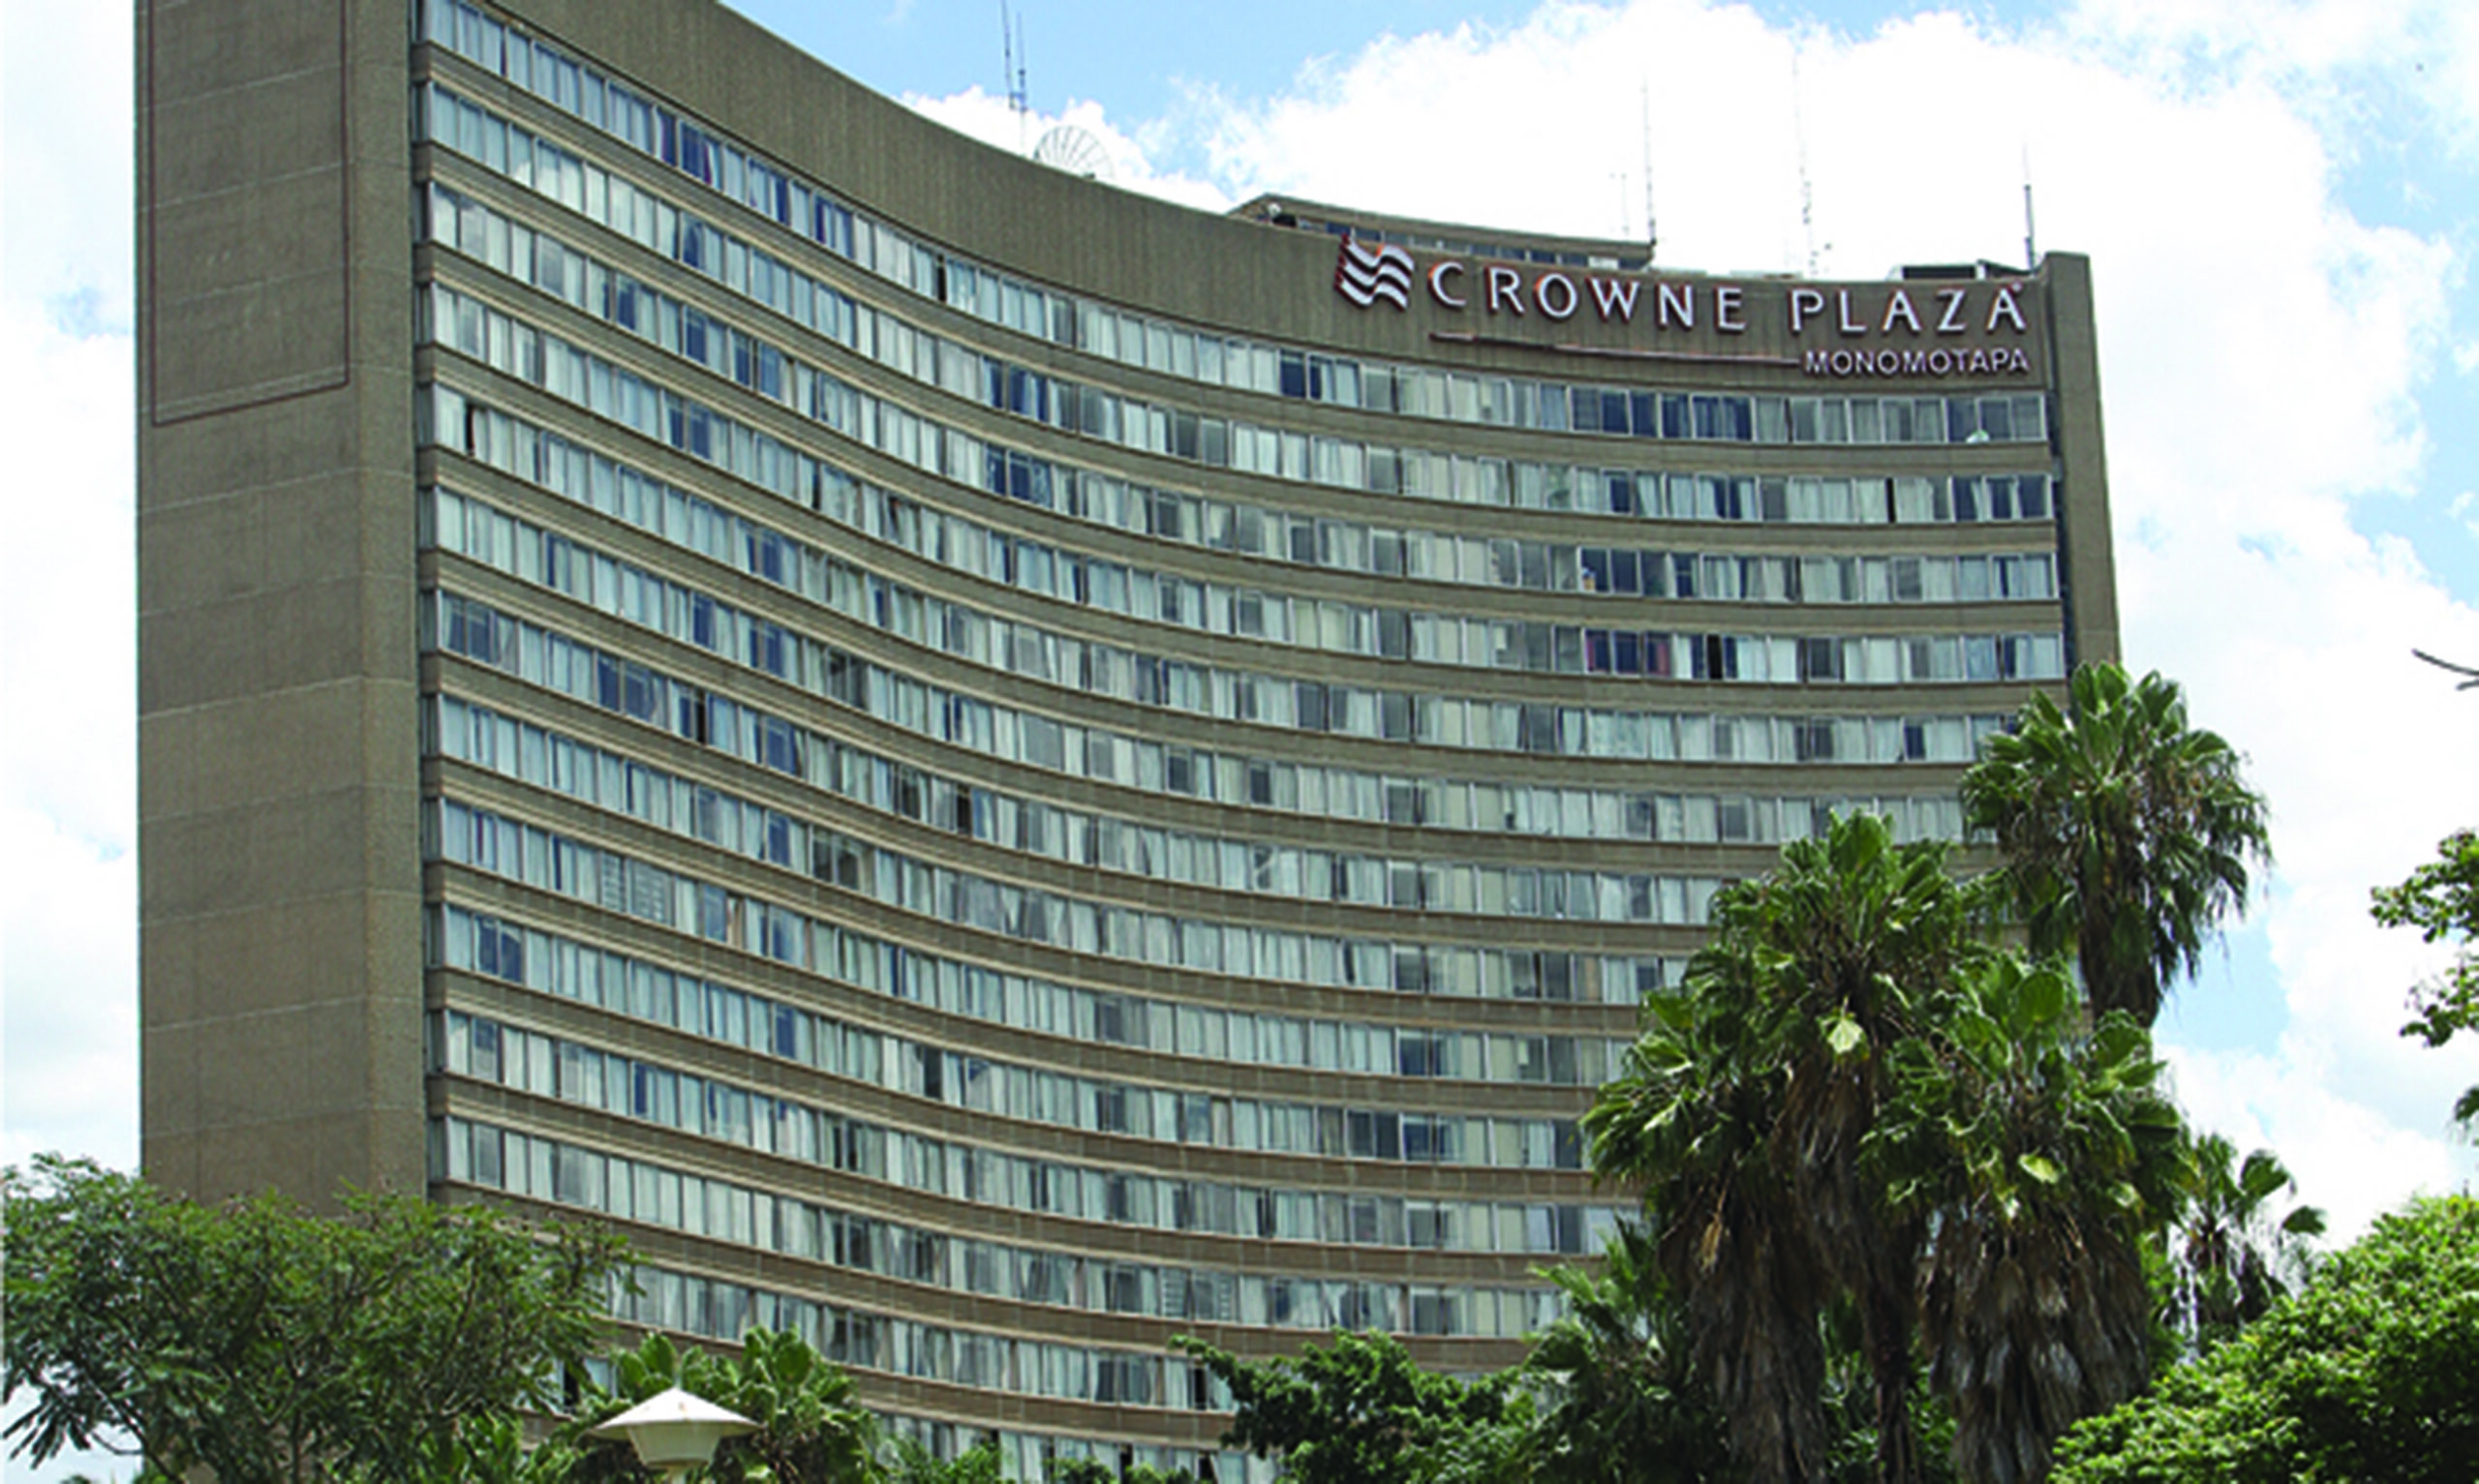 Man dies after falling from Crowne Plaza ‘Monomotapa’ Hotel room